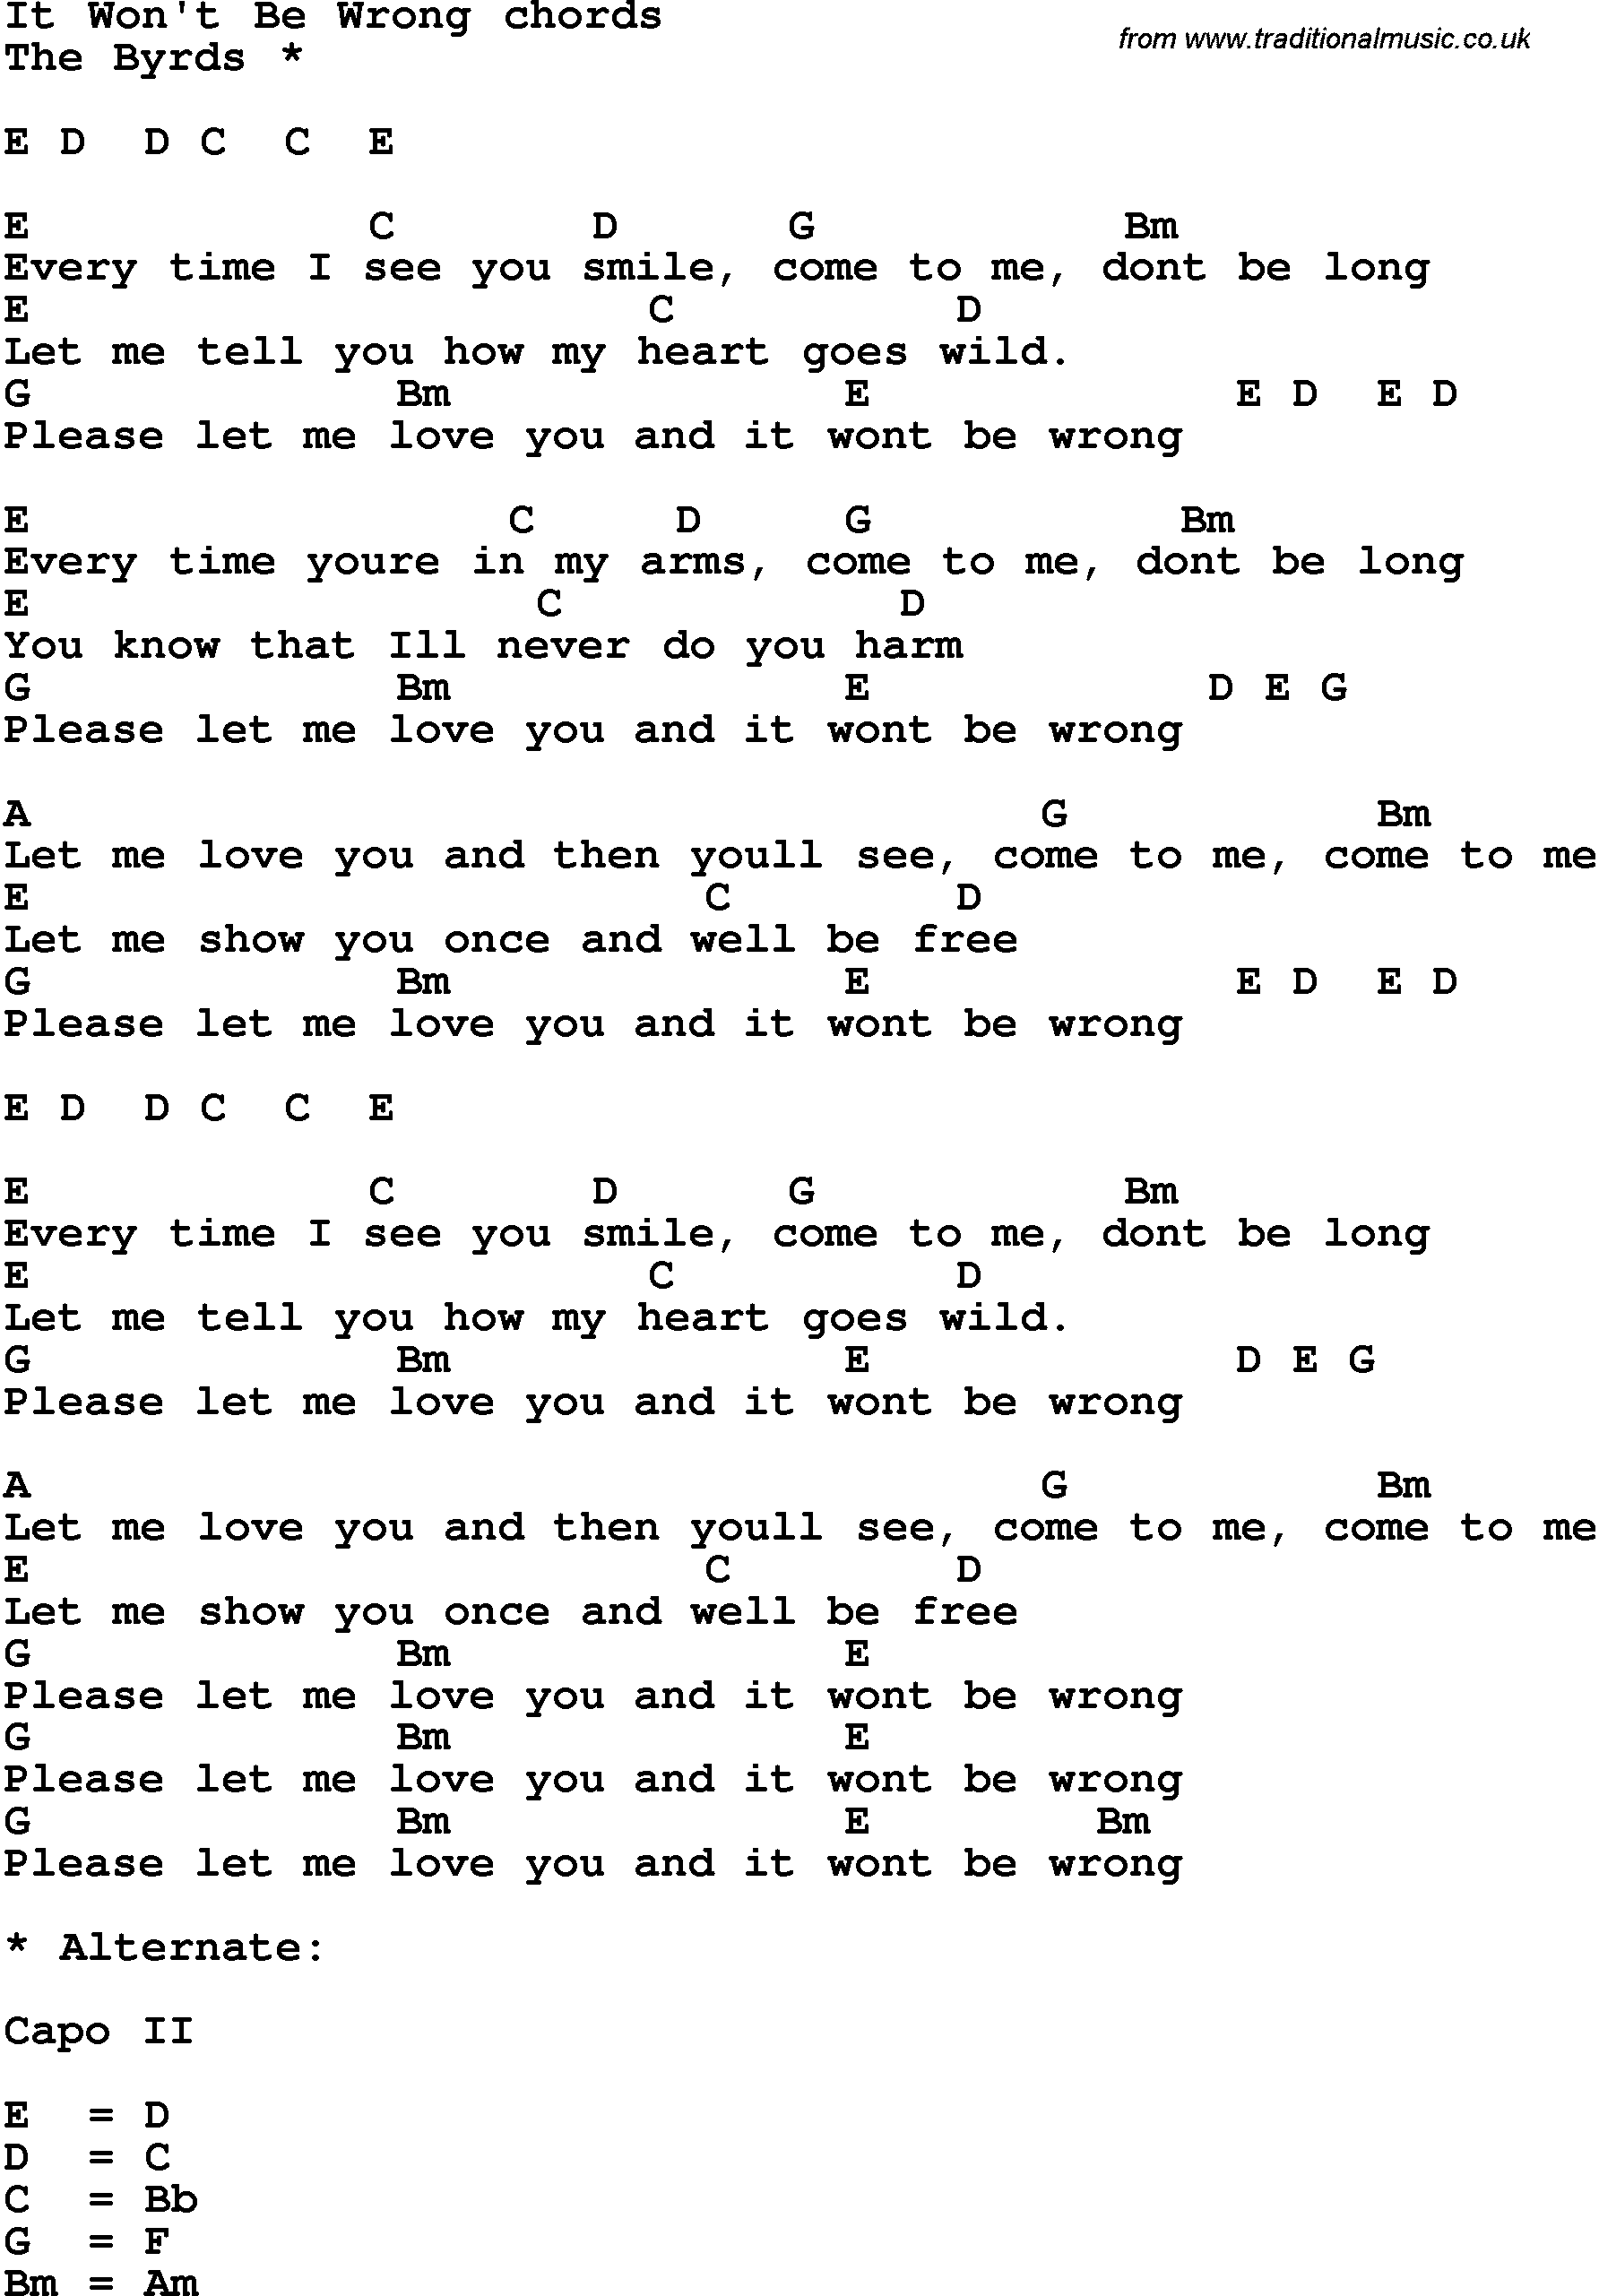 Song Lyrics with guitar chords for It Won't Be Wrong